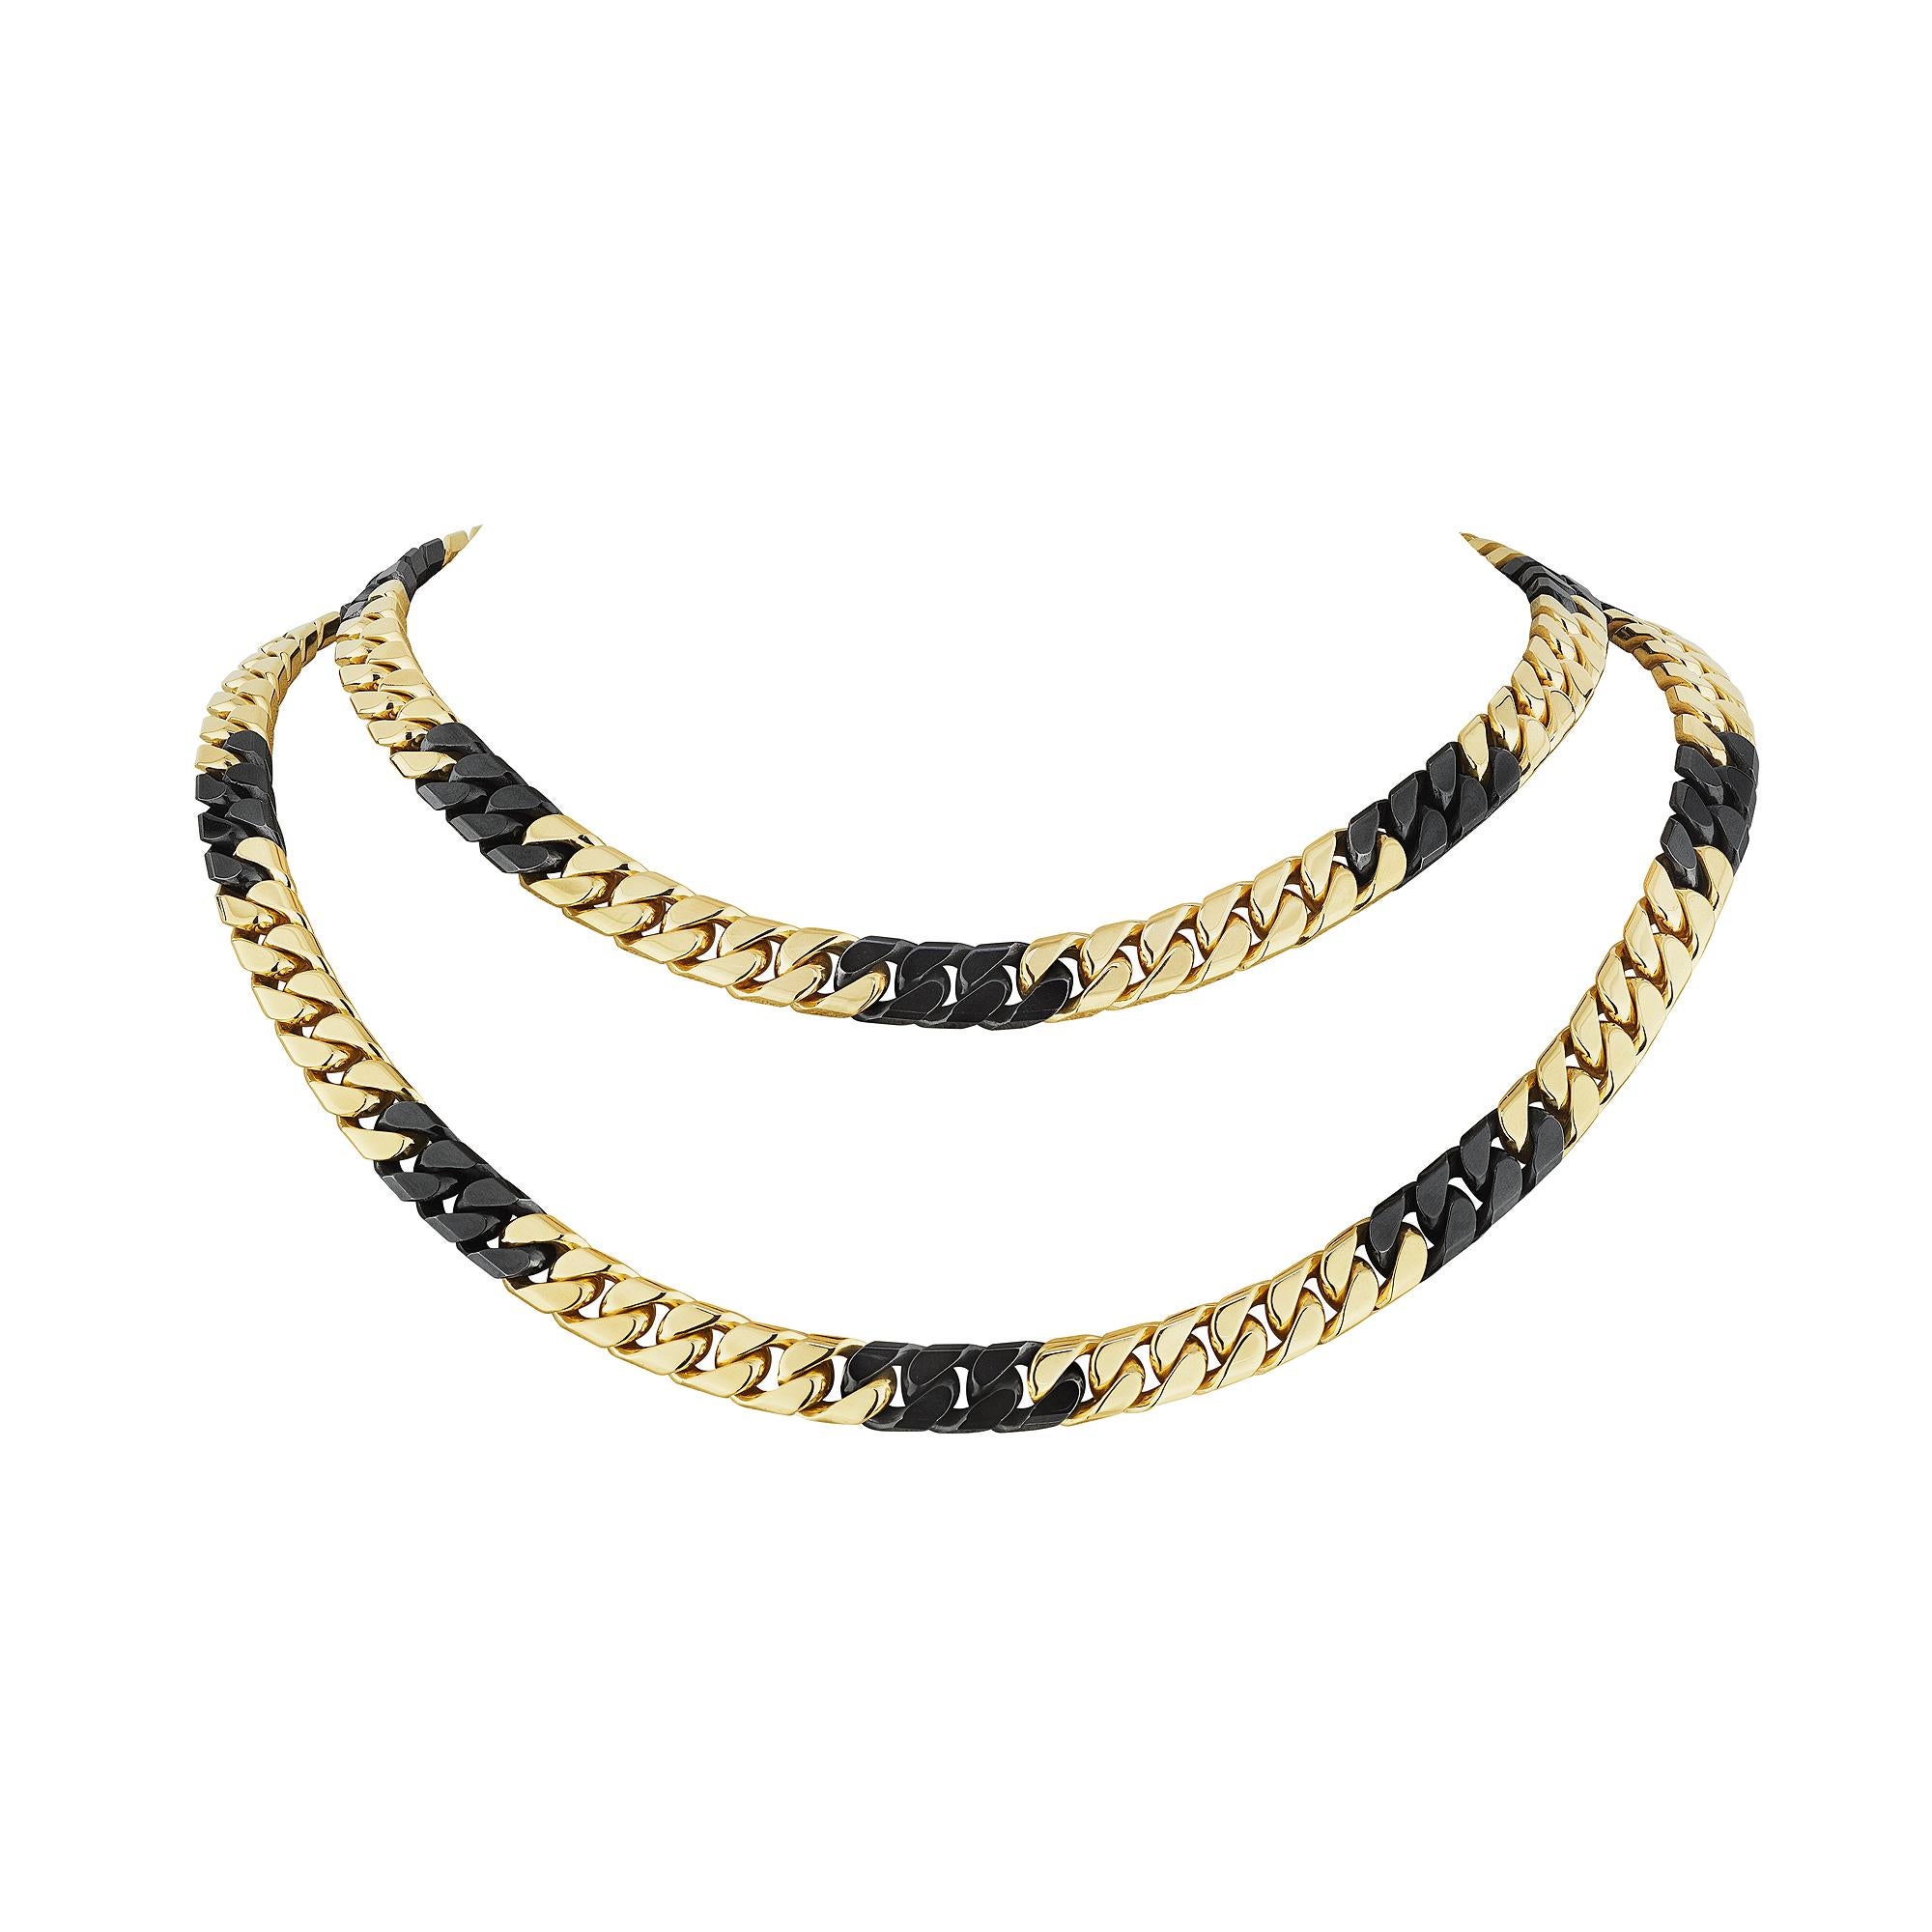 Everyone needs a bit of steel and you will have more than enough when wearing this Bulgari modernist necklace.  With 18 karat yellow gold curb links, interspersed with 16 blackened steel sections, this necklace can be worn long, doubled, or as two